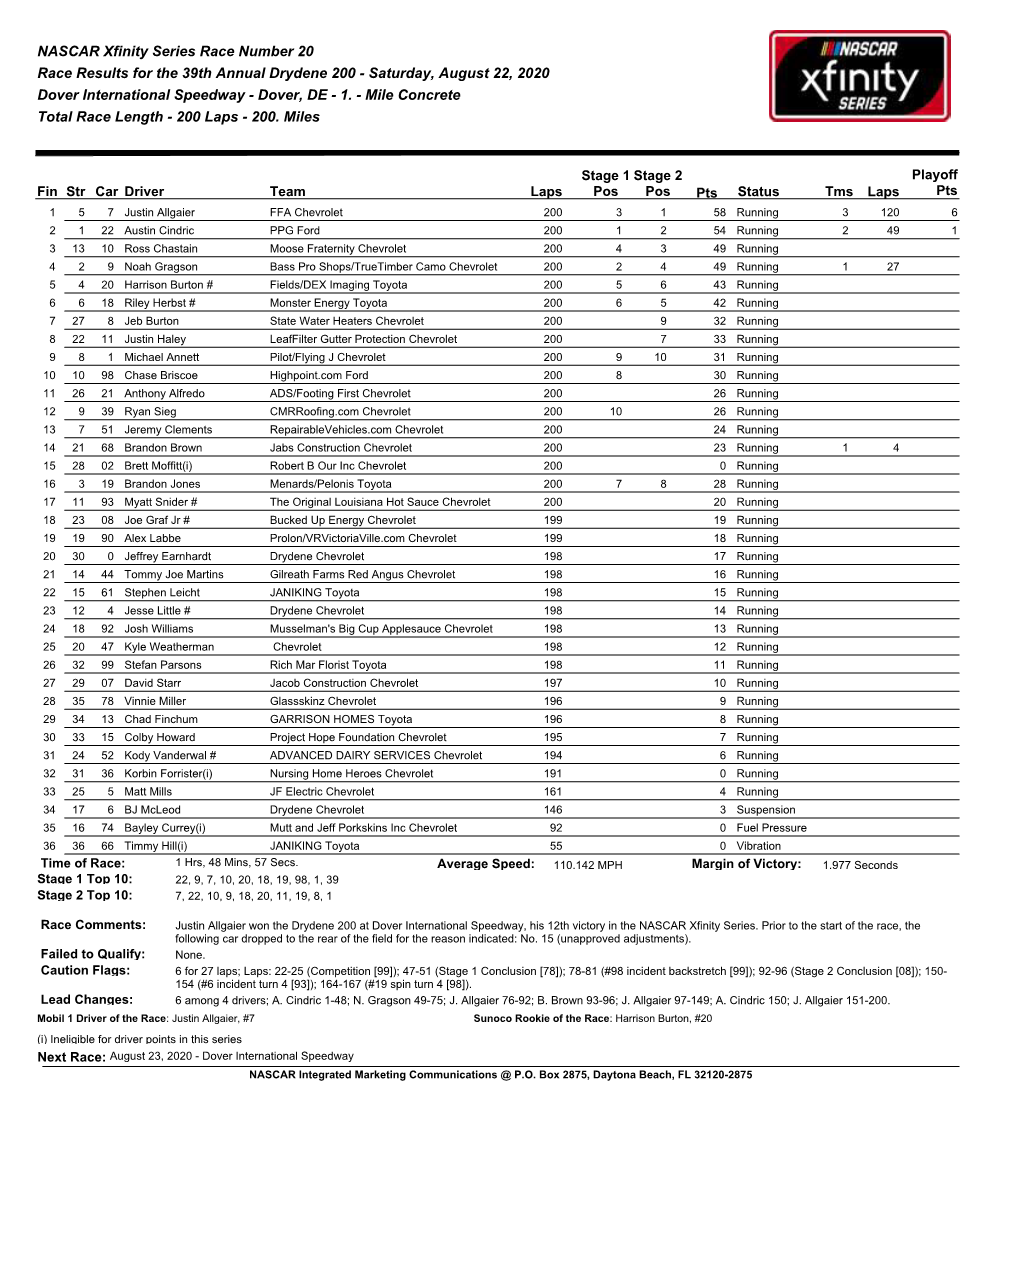 Race Results for the 39Th Annual Drydene 200 - Saturday, August 22, 2020 Dover International Speedway - Dover, DE - 1